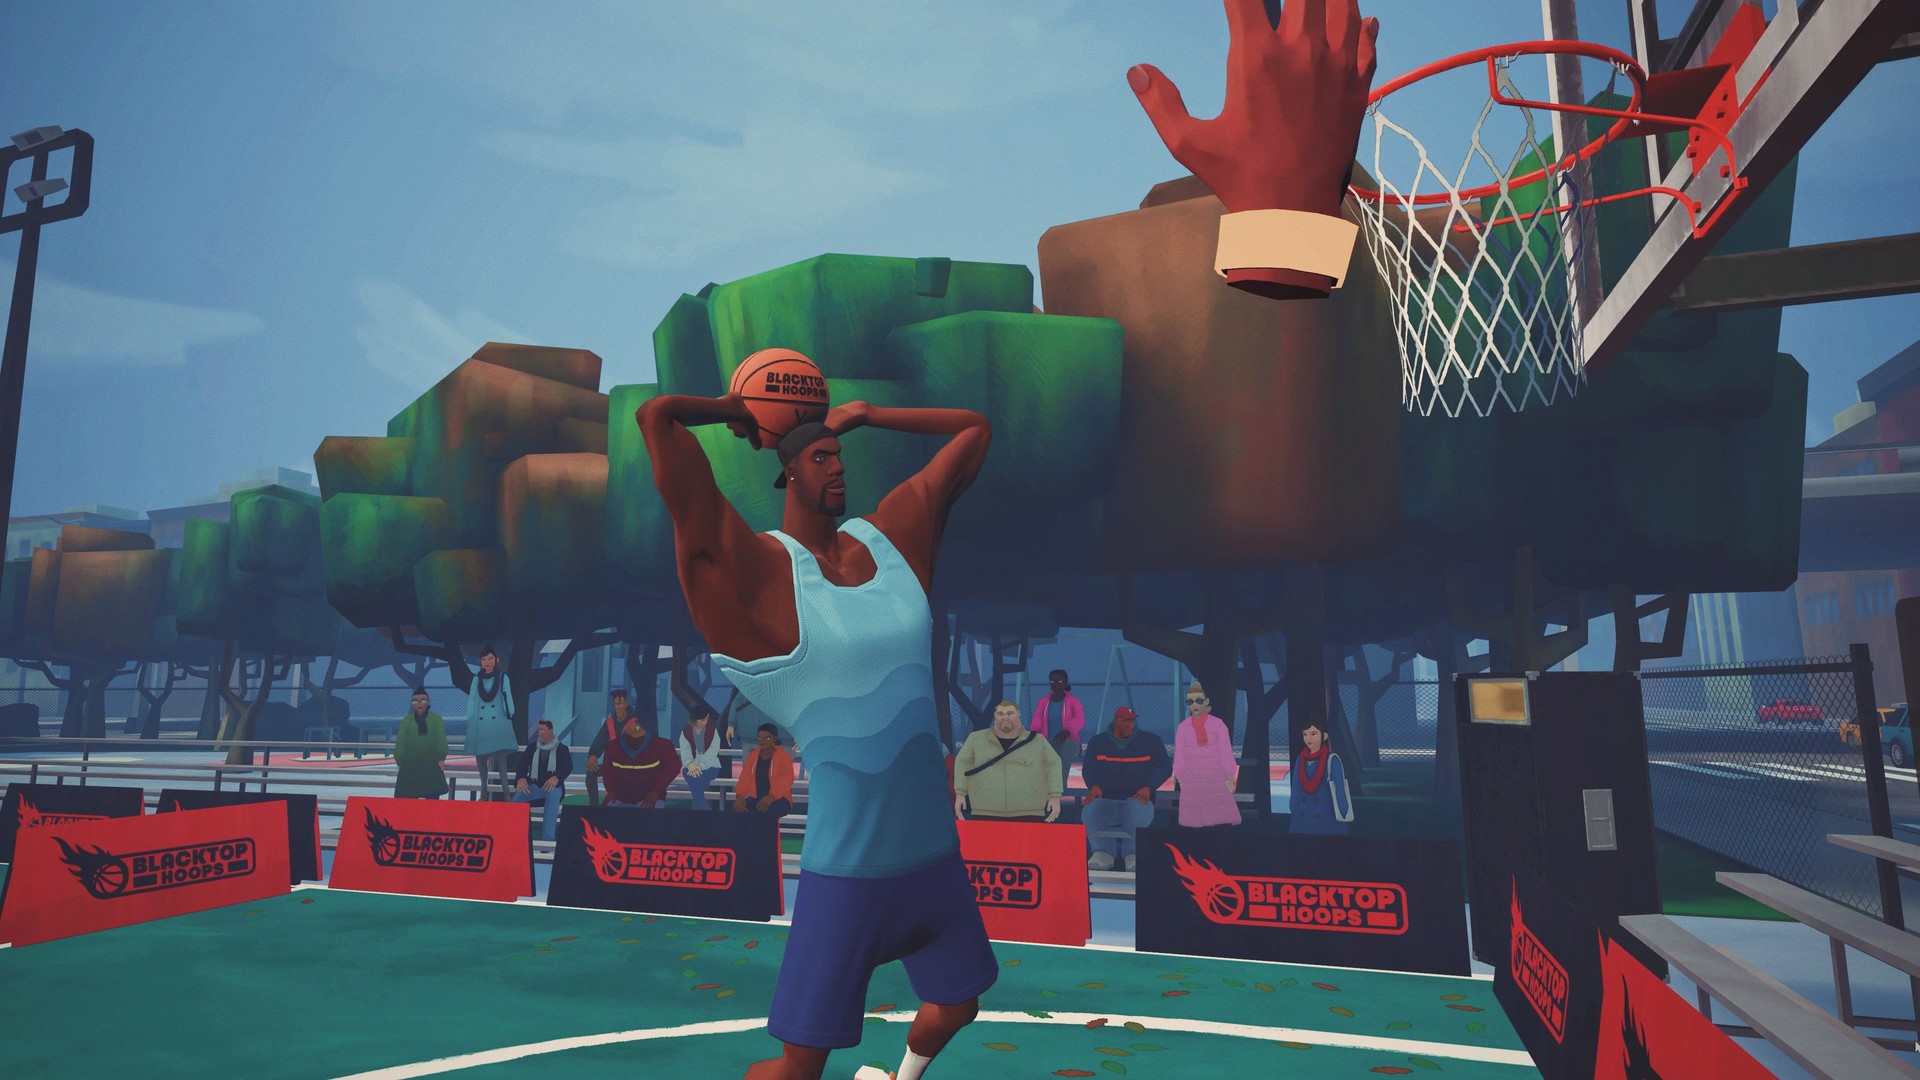 ‘Blacktop Hoops’ is Like ‘NBA Street’ in VR, Coming to Quest 2 & PC VR Next Year – Road to VR